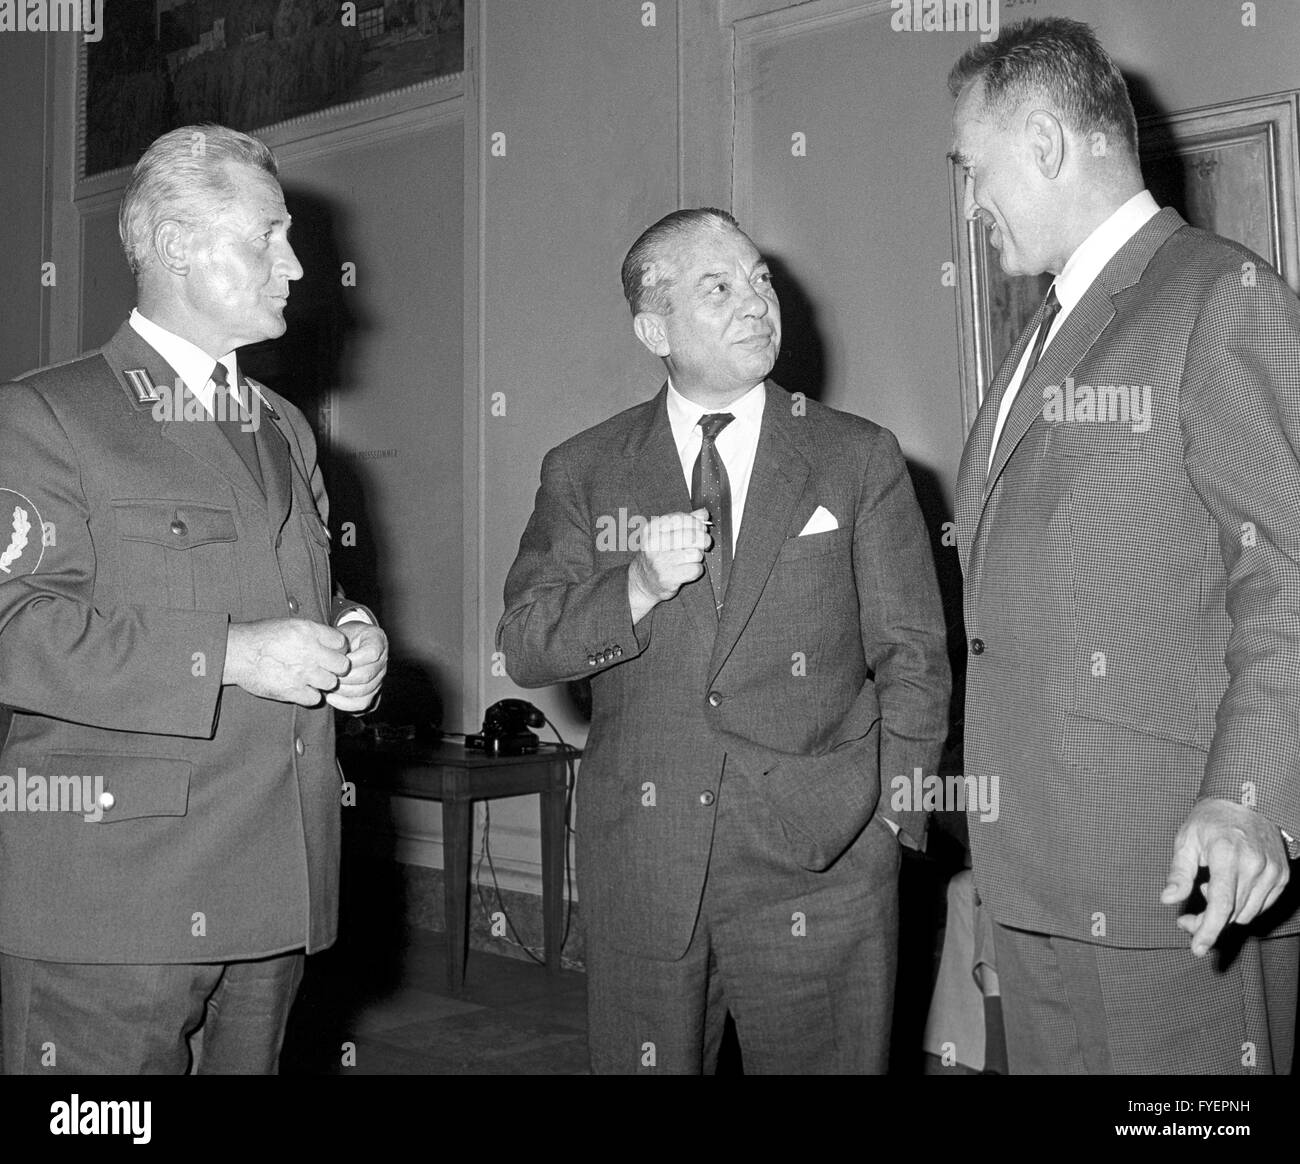 Hans-Ulrich Werner, Erich Duensing and Wolfram Sangmeister (l-r) during a meeting break of the parliamentary investigation committee on 26 June 1967 to examine the events during the Shah's visit. Stock Photo